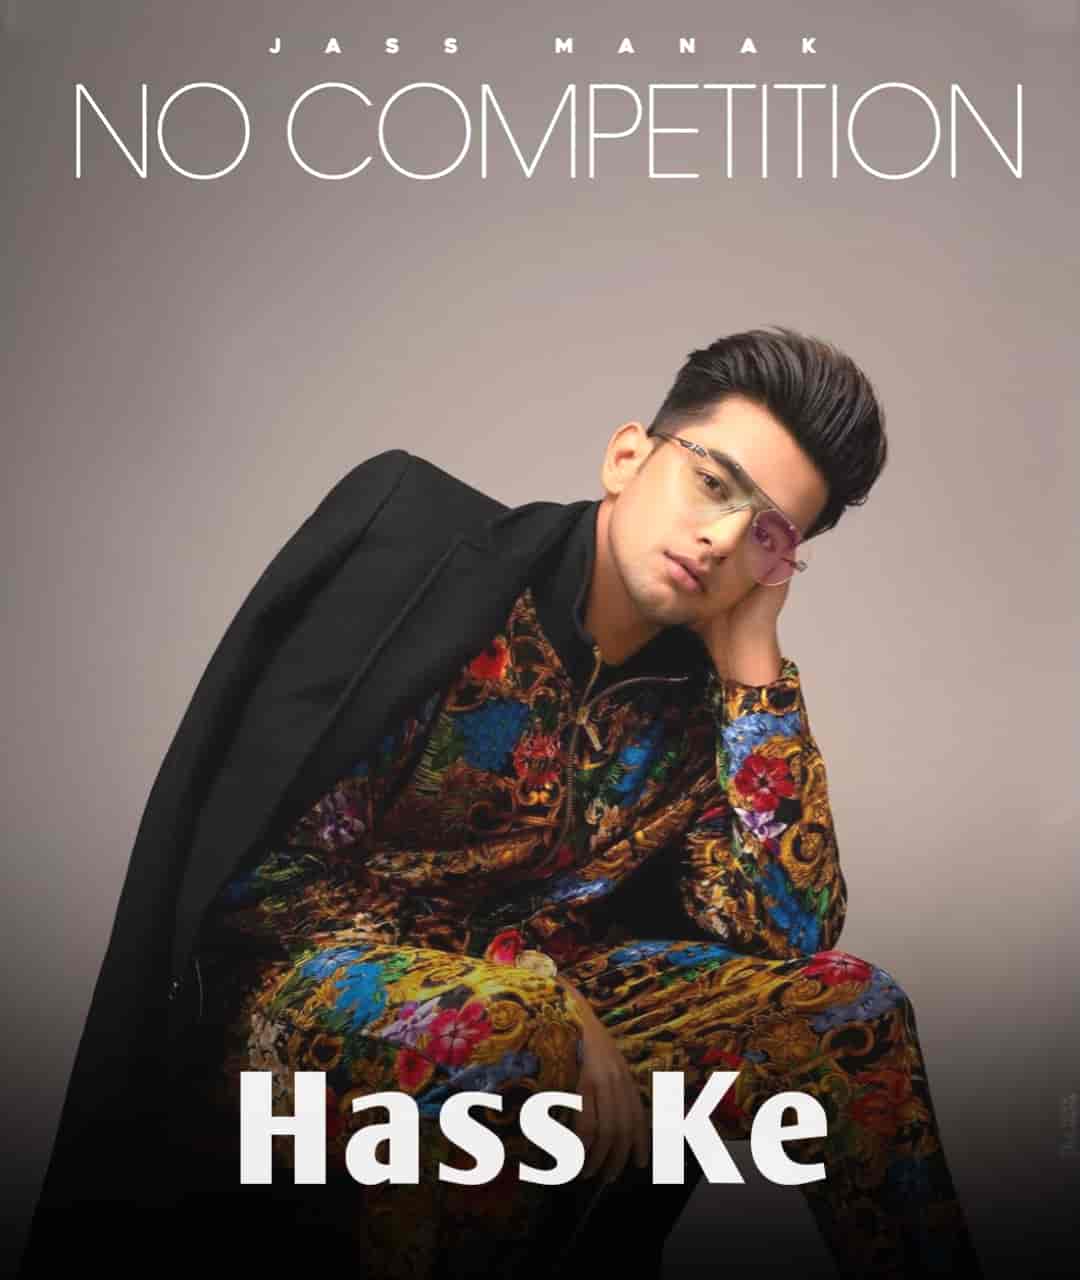 Hass Ke Punjabi Song Image From Album No Competition Of Jass Manak